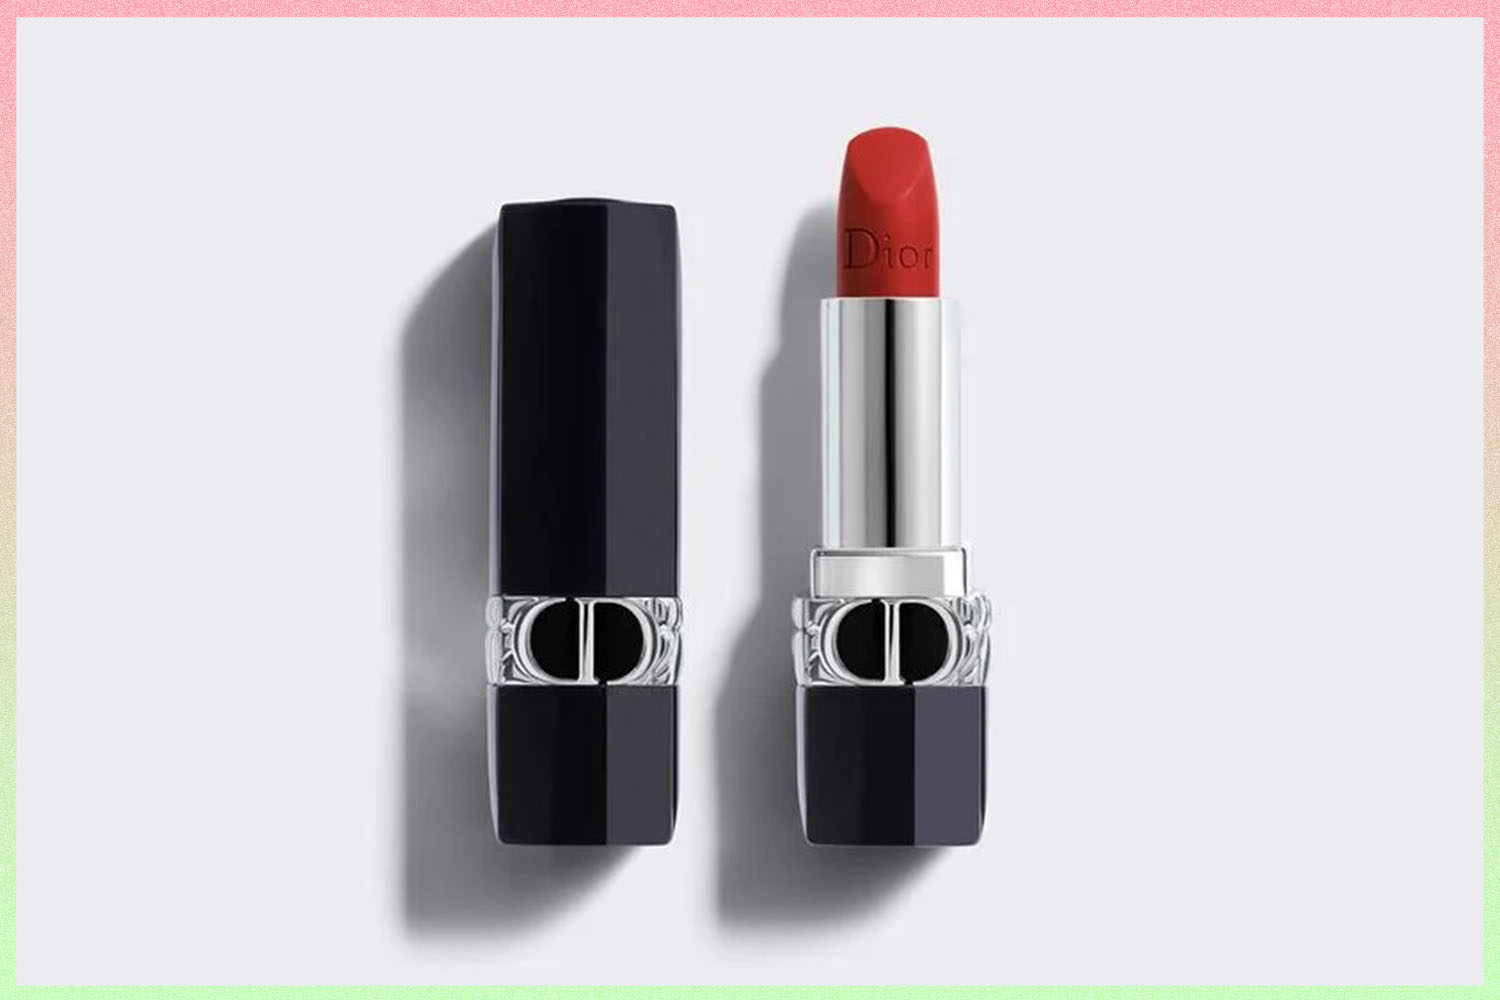 Rouge Dior red lipstick in shade 999